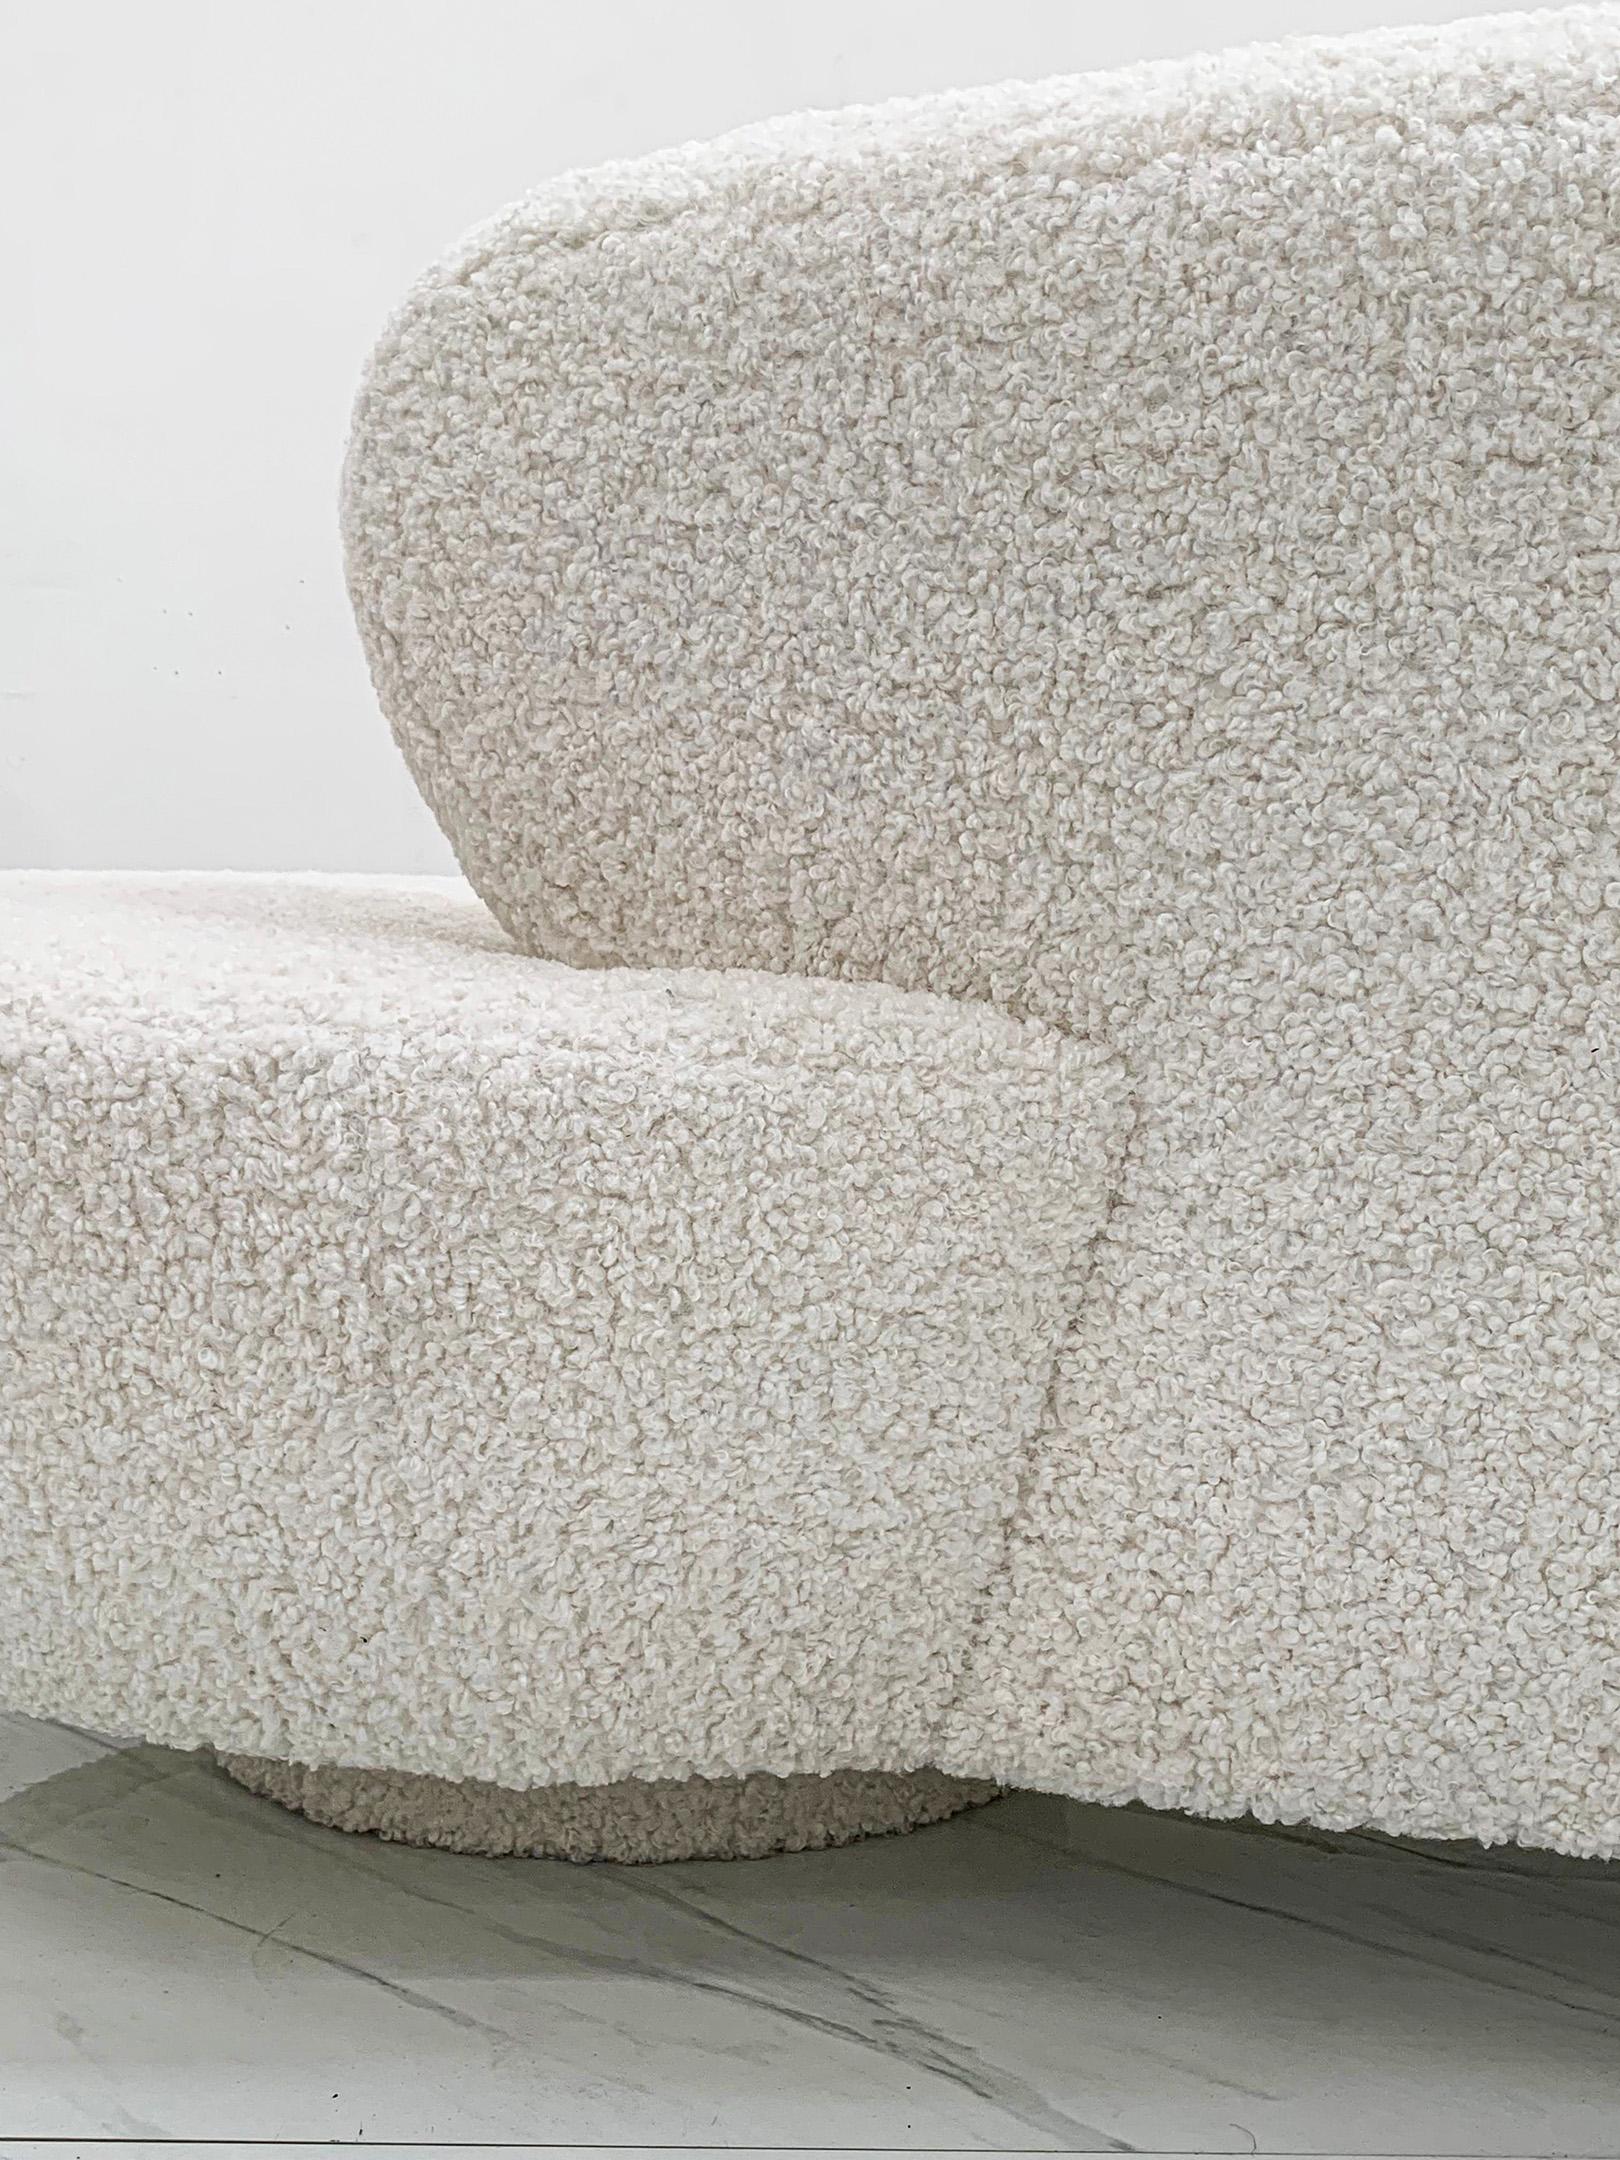 Late 20th Century Vladimir Kagan Cloud Serpentine Sofa Upholstered in Heavy Ivory Boucle